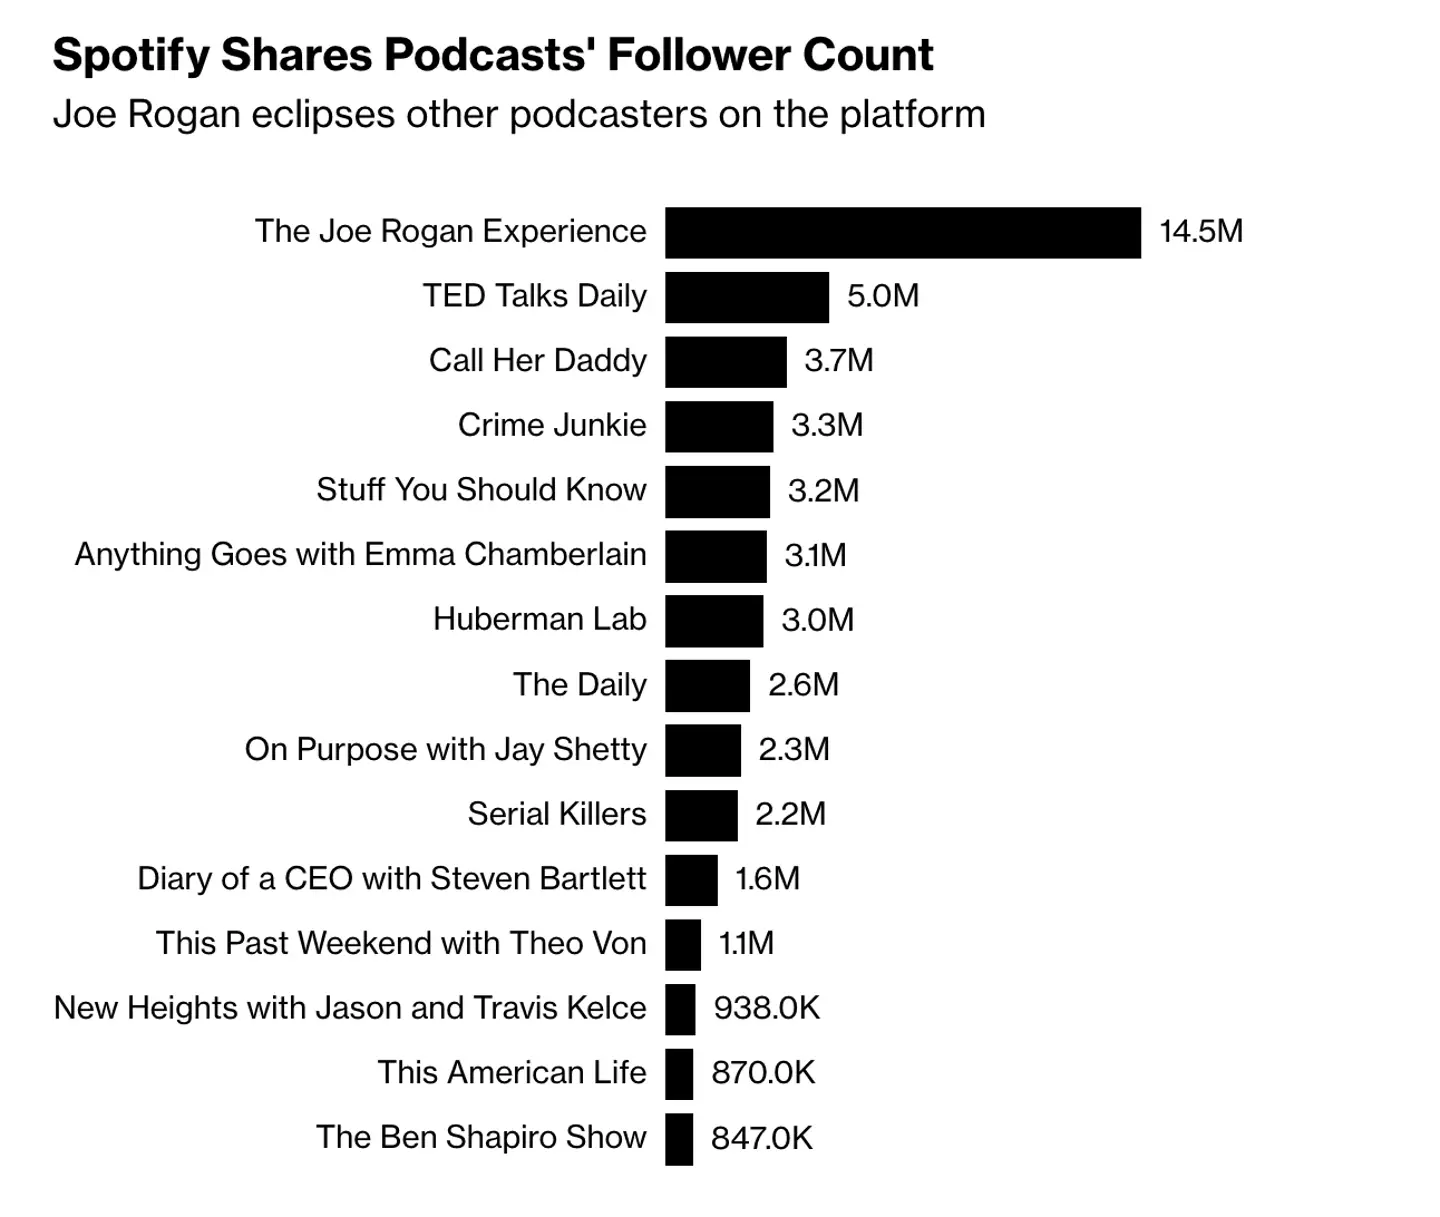 Rogan's podcast 'overshadows' all others with over 14.5 million followers.